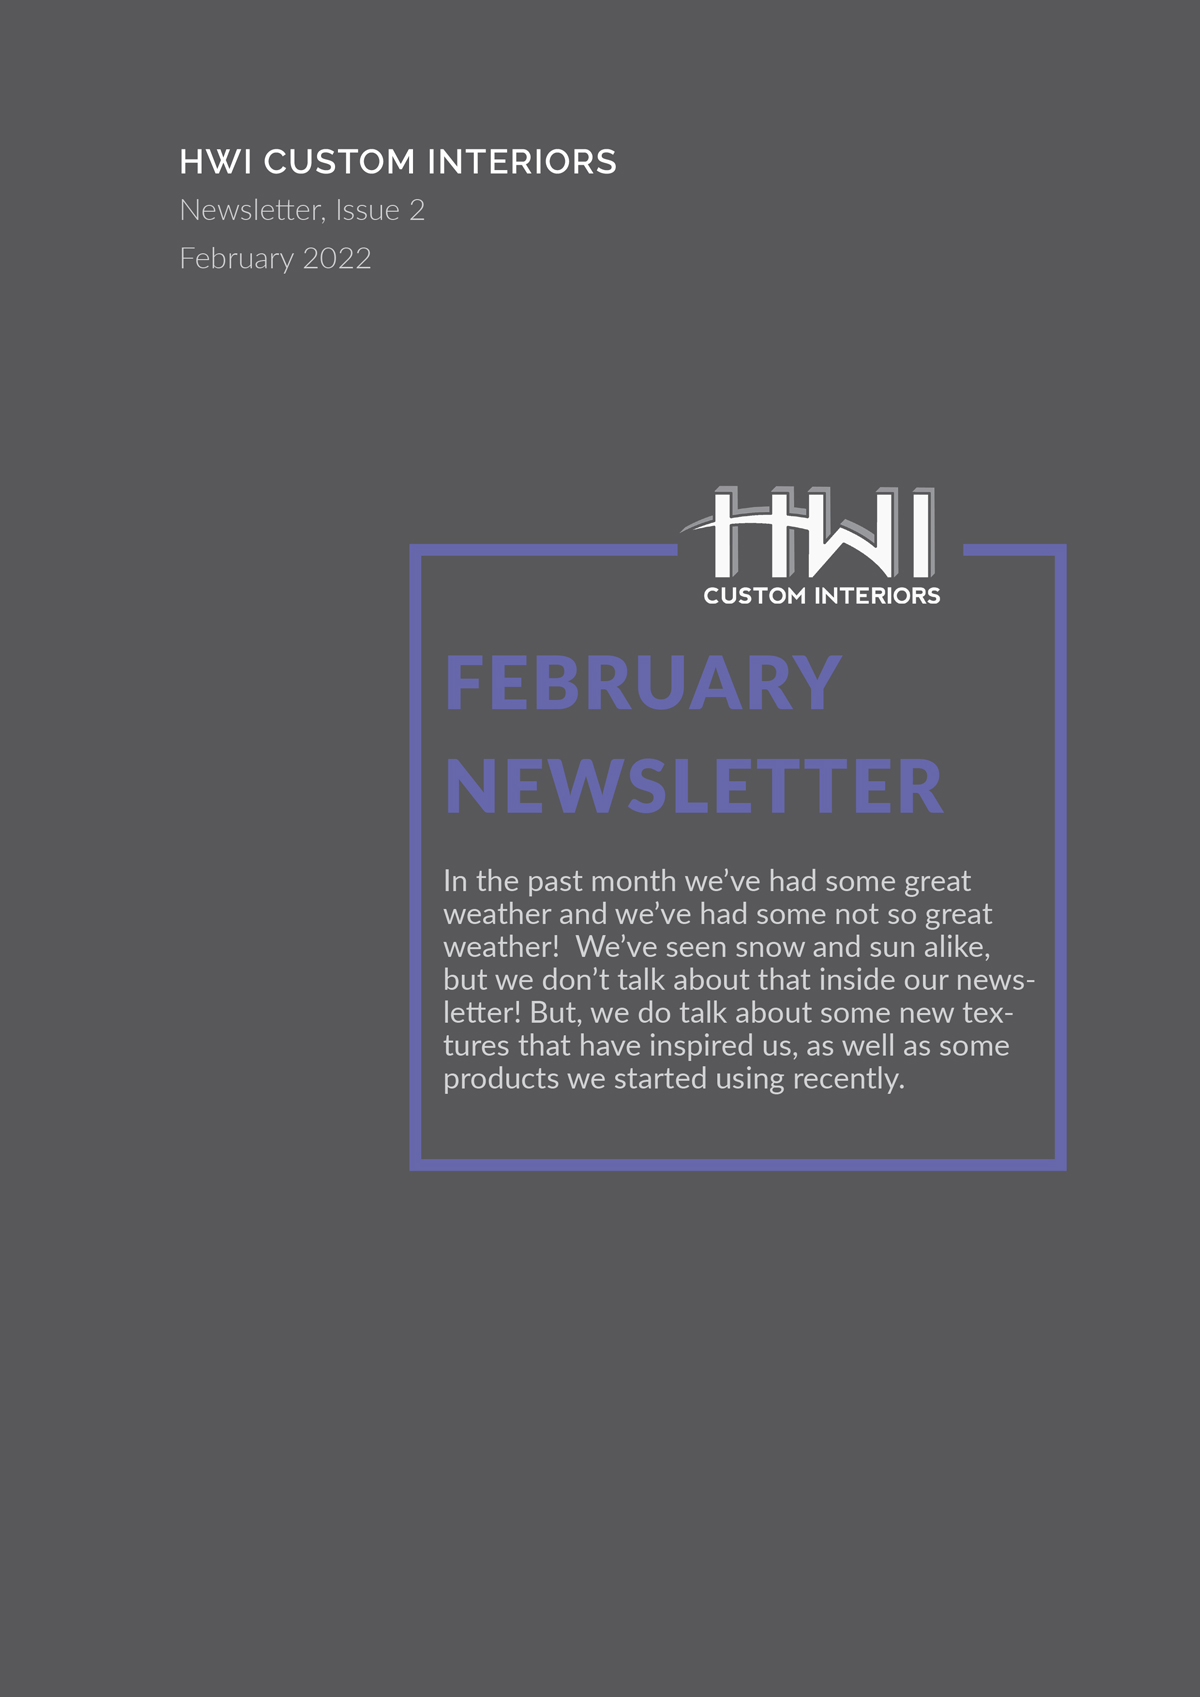 HWI February Newsletter - new textures and new products.